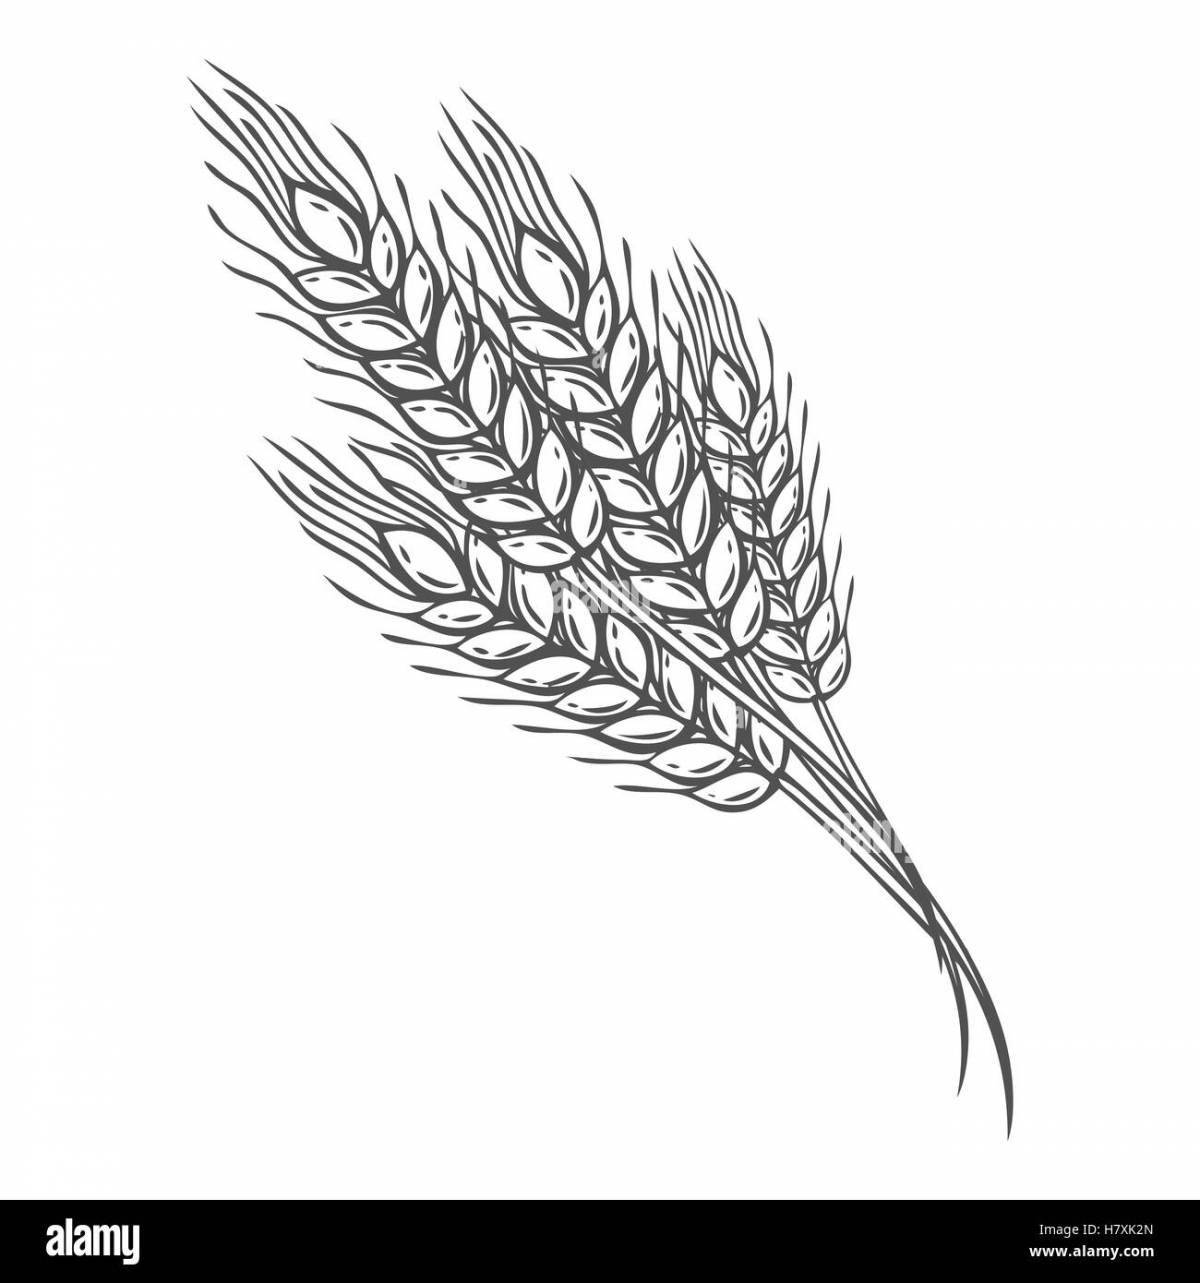 A fascinating spikelet coloring book for the little ones